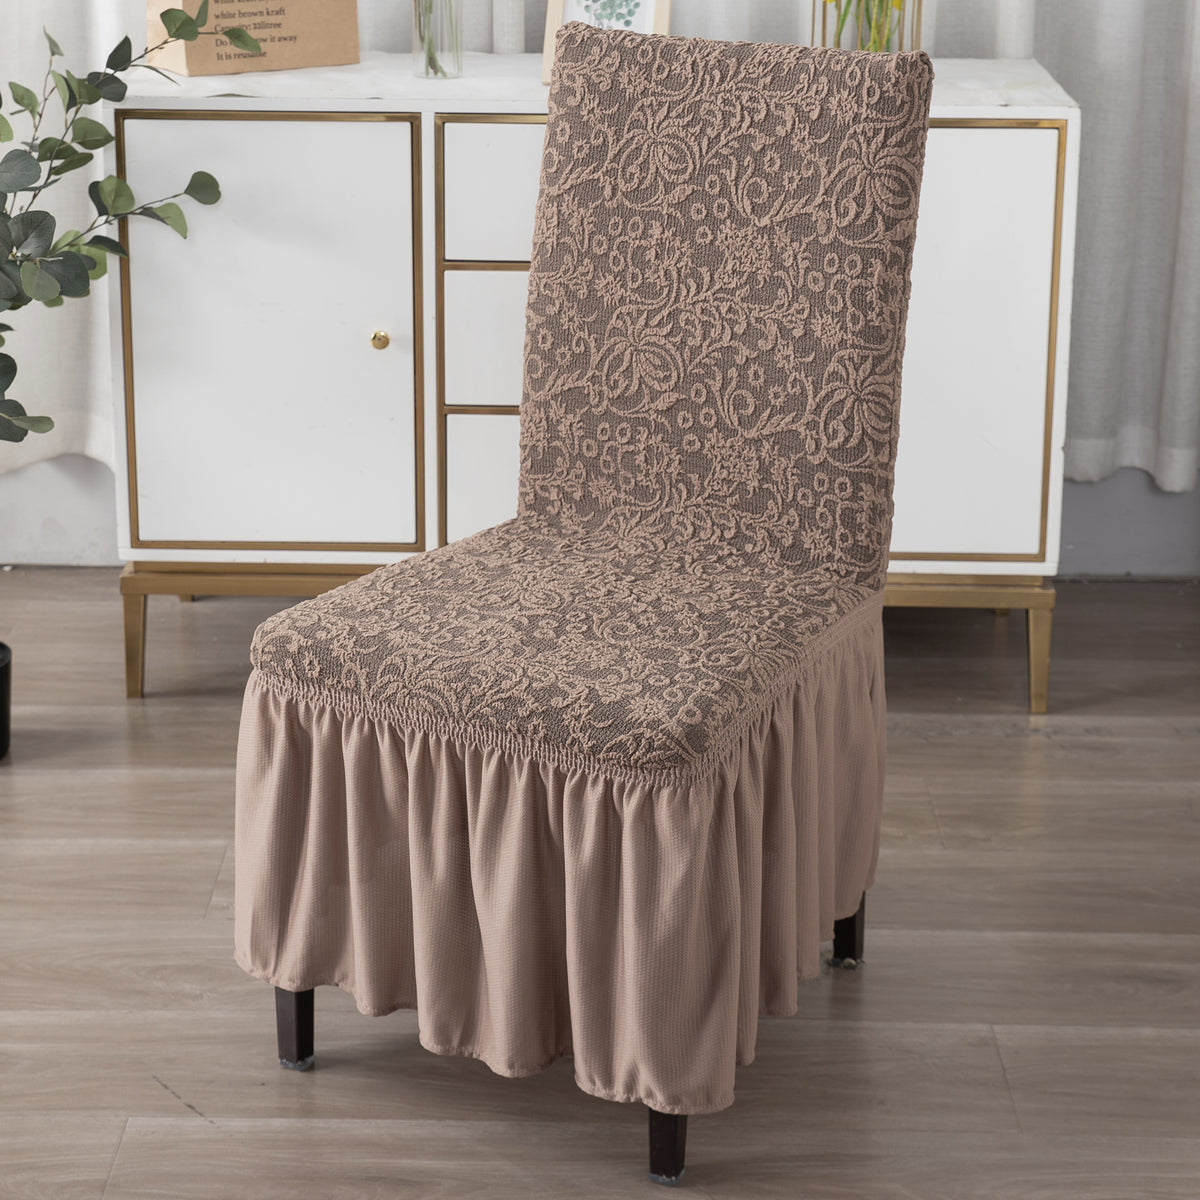 Elastic Stretchable Designer Woven Jacquard Dining Chair Cover with Frill, Light Taupe